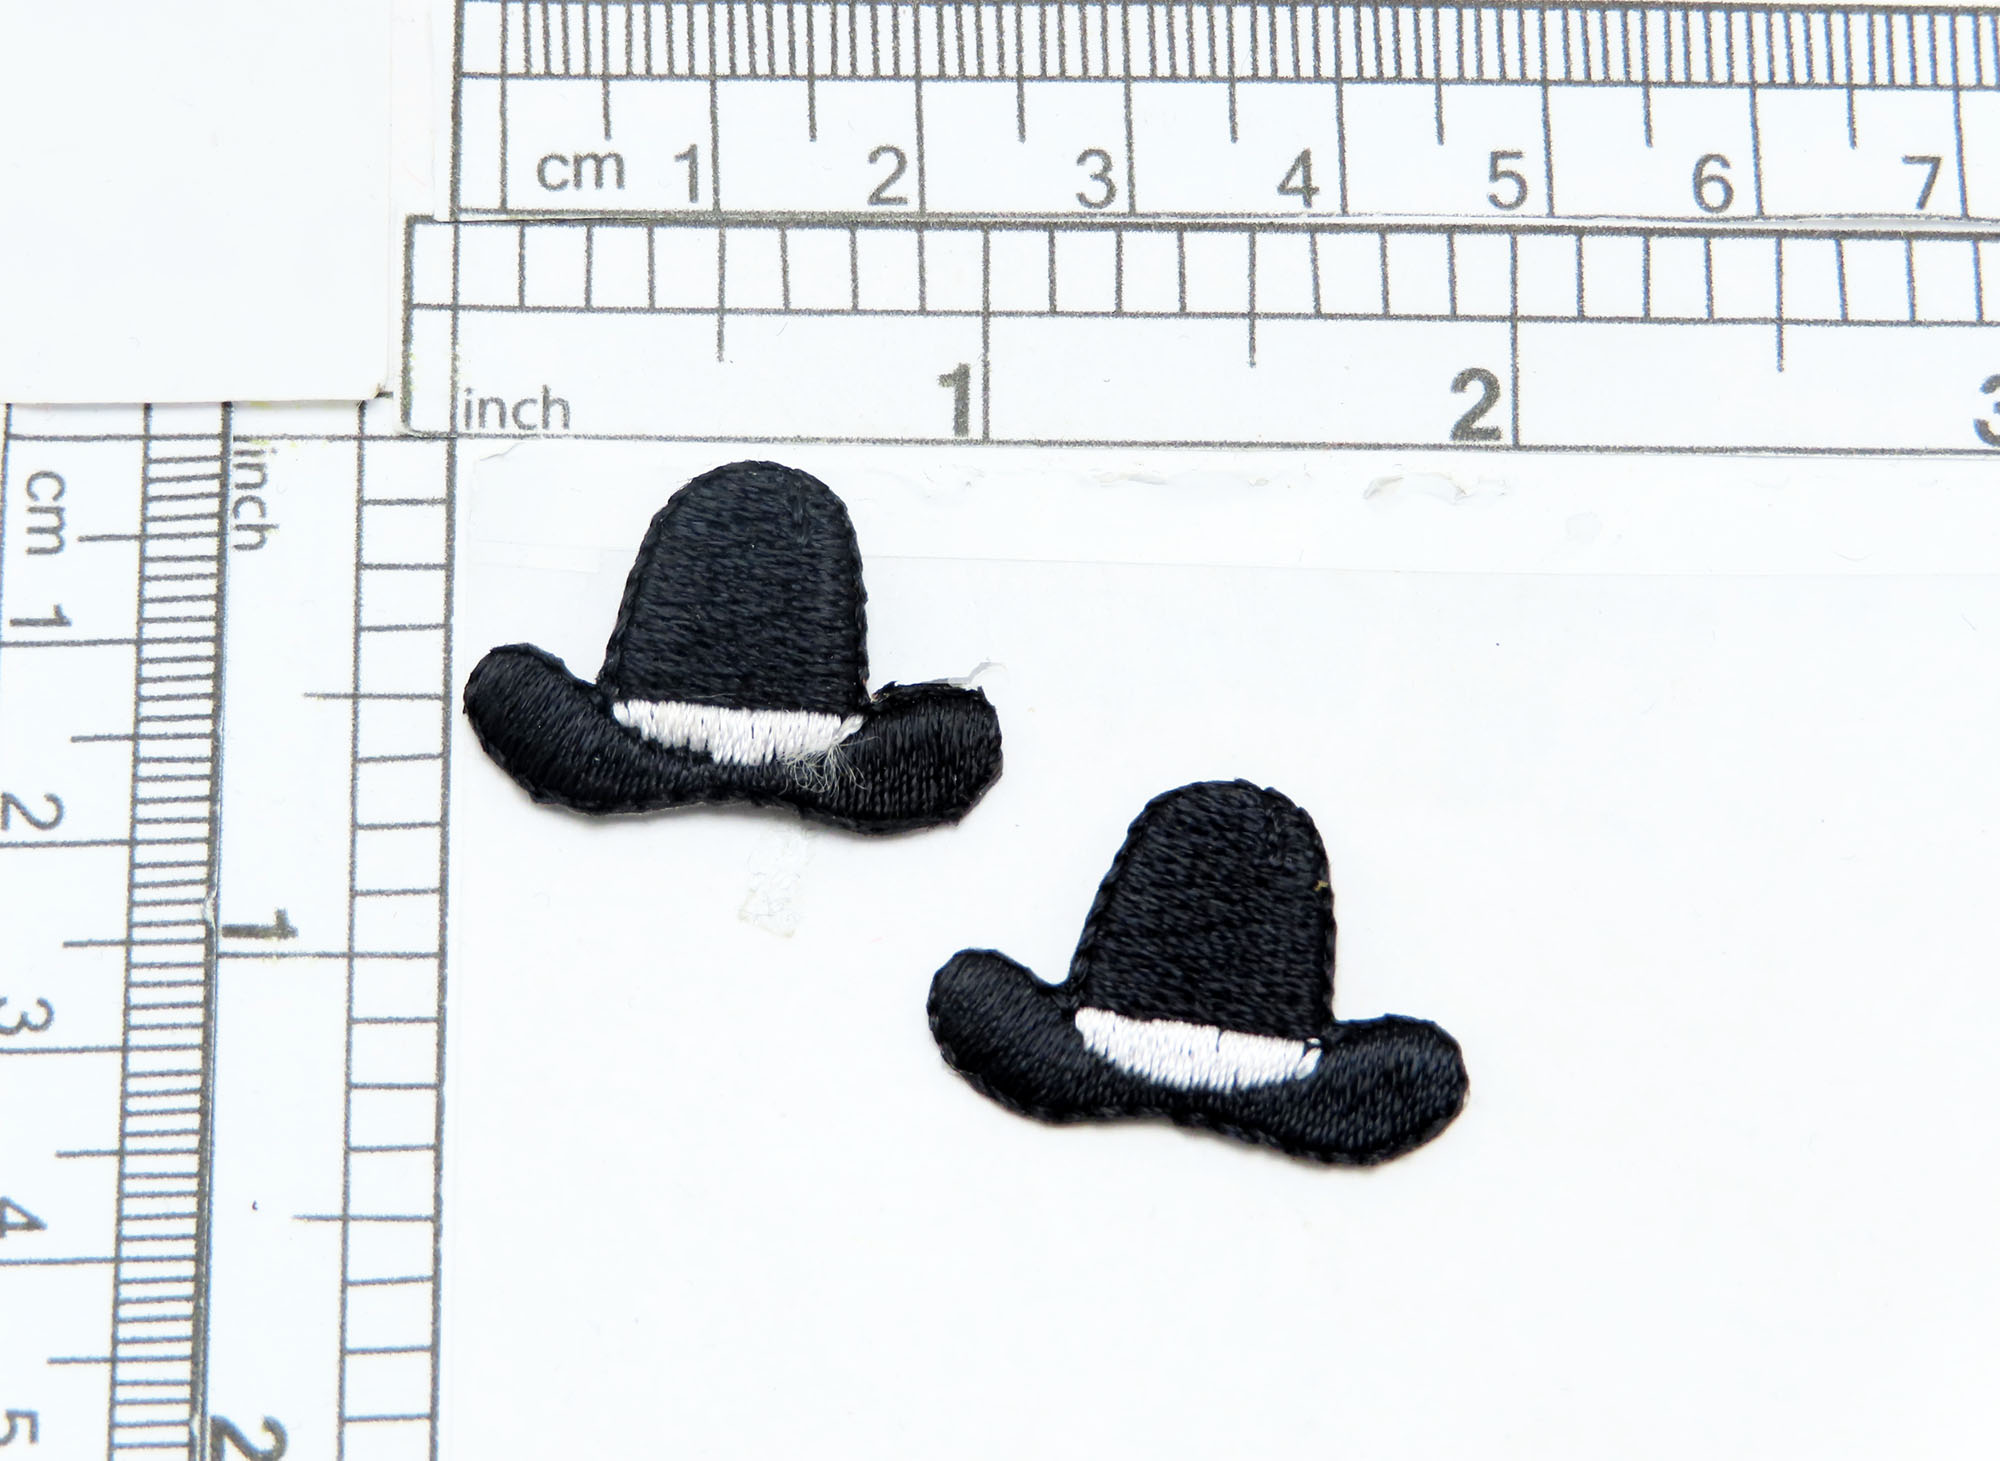 Hat Cowboy Stetson 10 Gallon 3 pack Ion On Applique

Fully Embroidered

Measures 1" high x 3/4" wide approximately (25mm x 19mm)